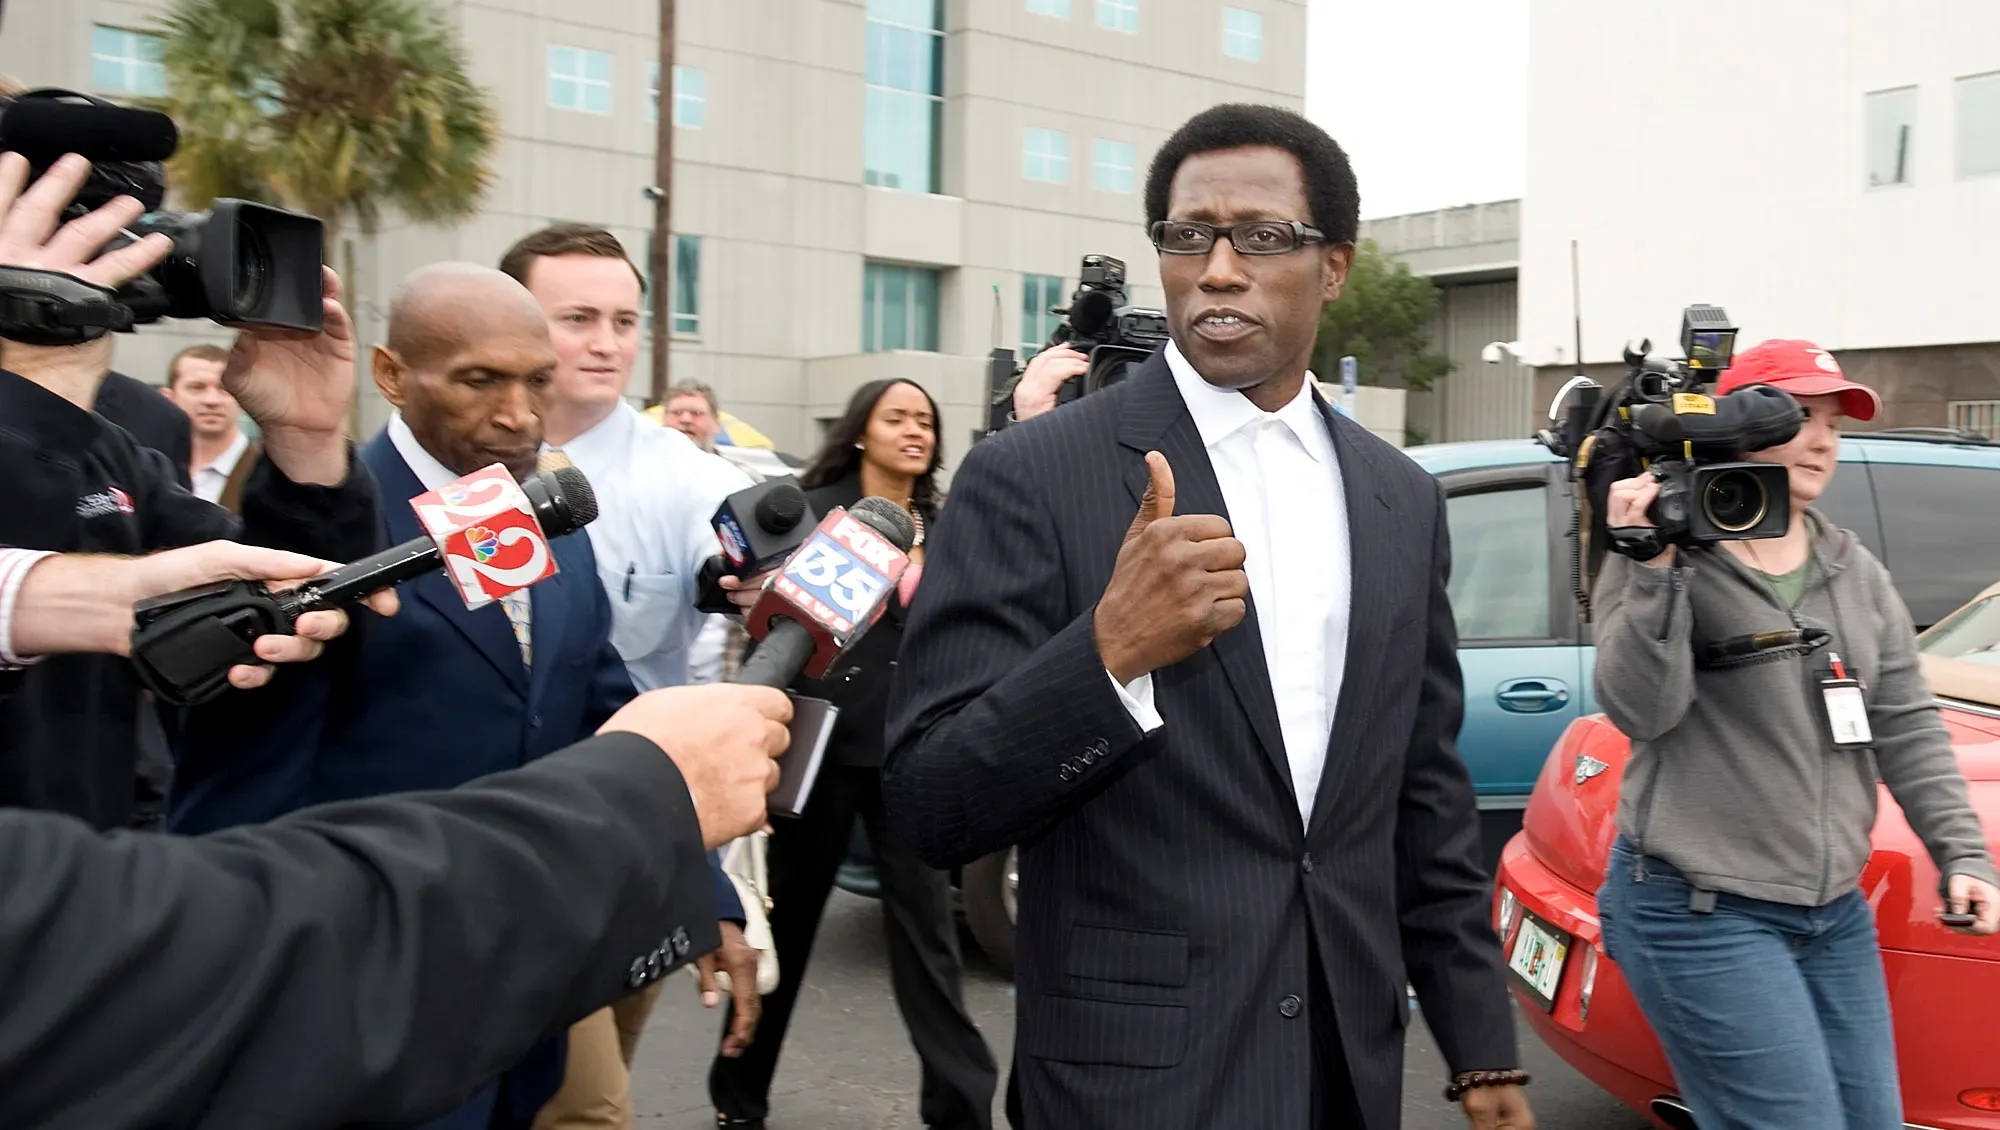 wesley snipes release date from jail